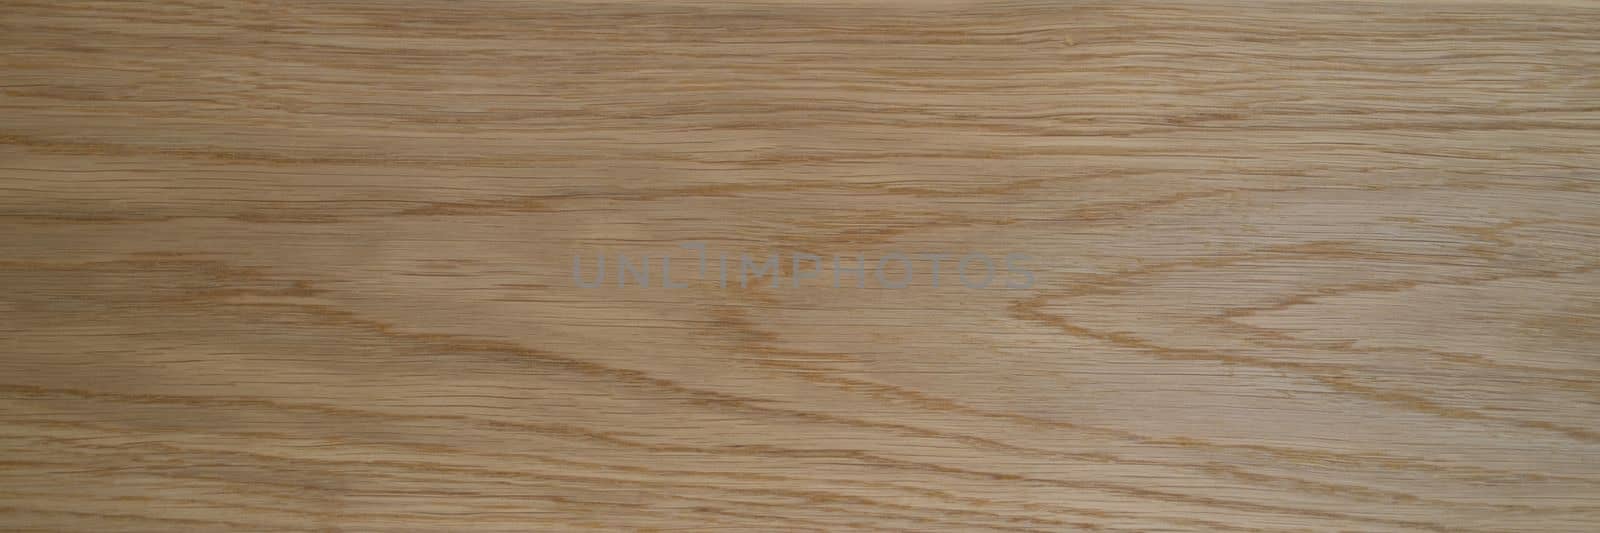 Wooden texture of laminate board or parquet closeup by kuprevich